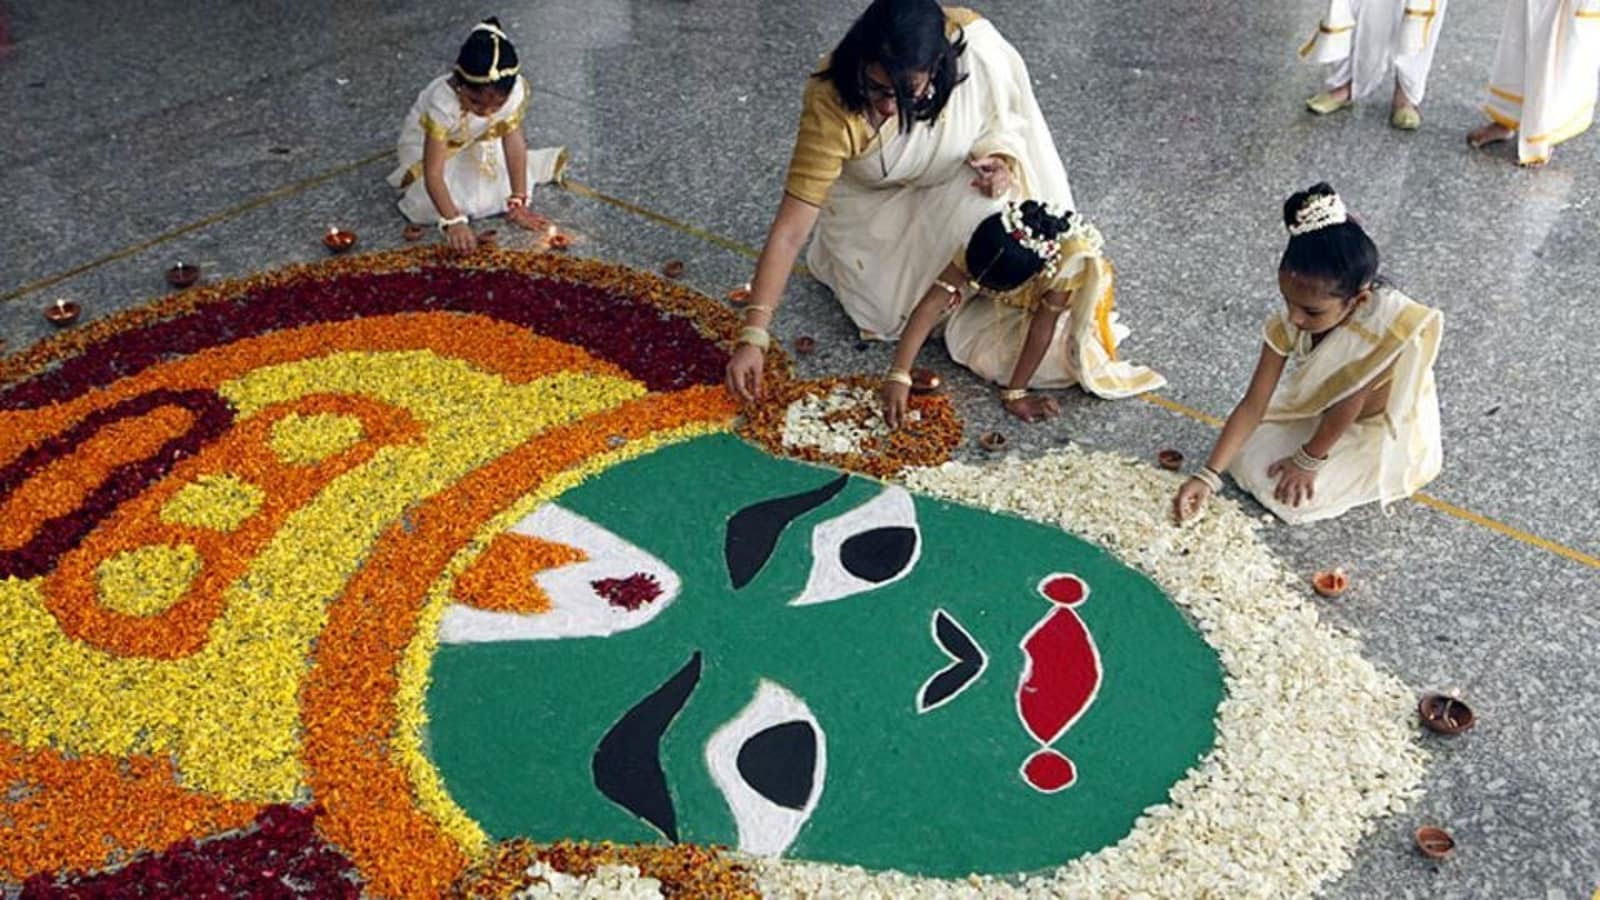 5.2 Lac State Government employees will get a bonus for Onam